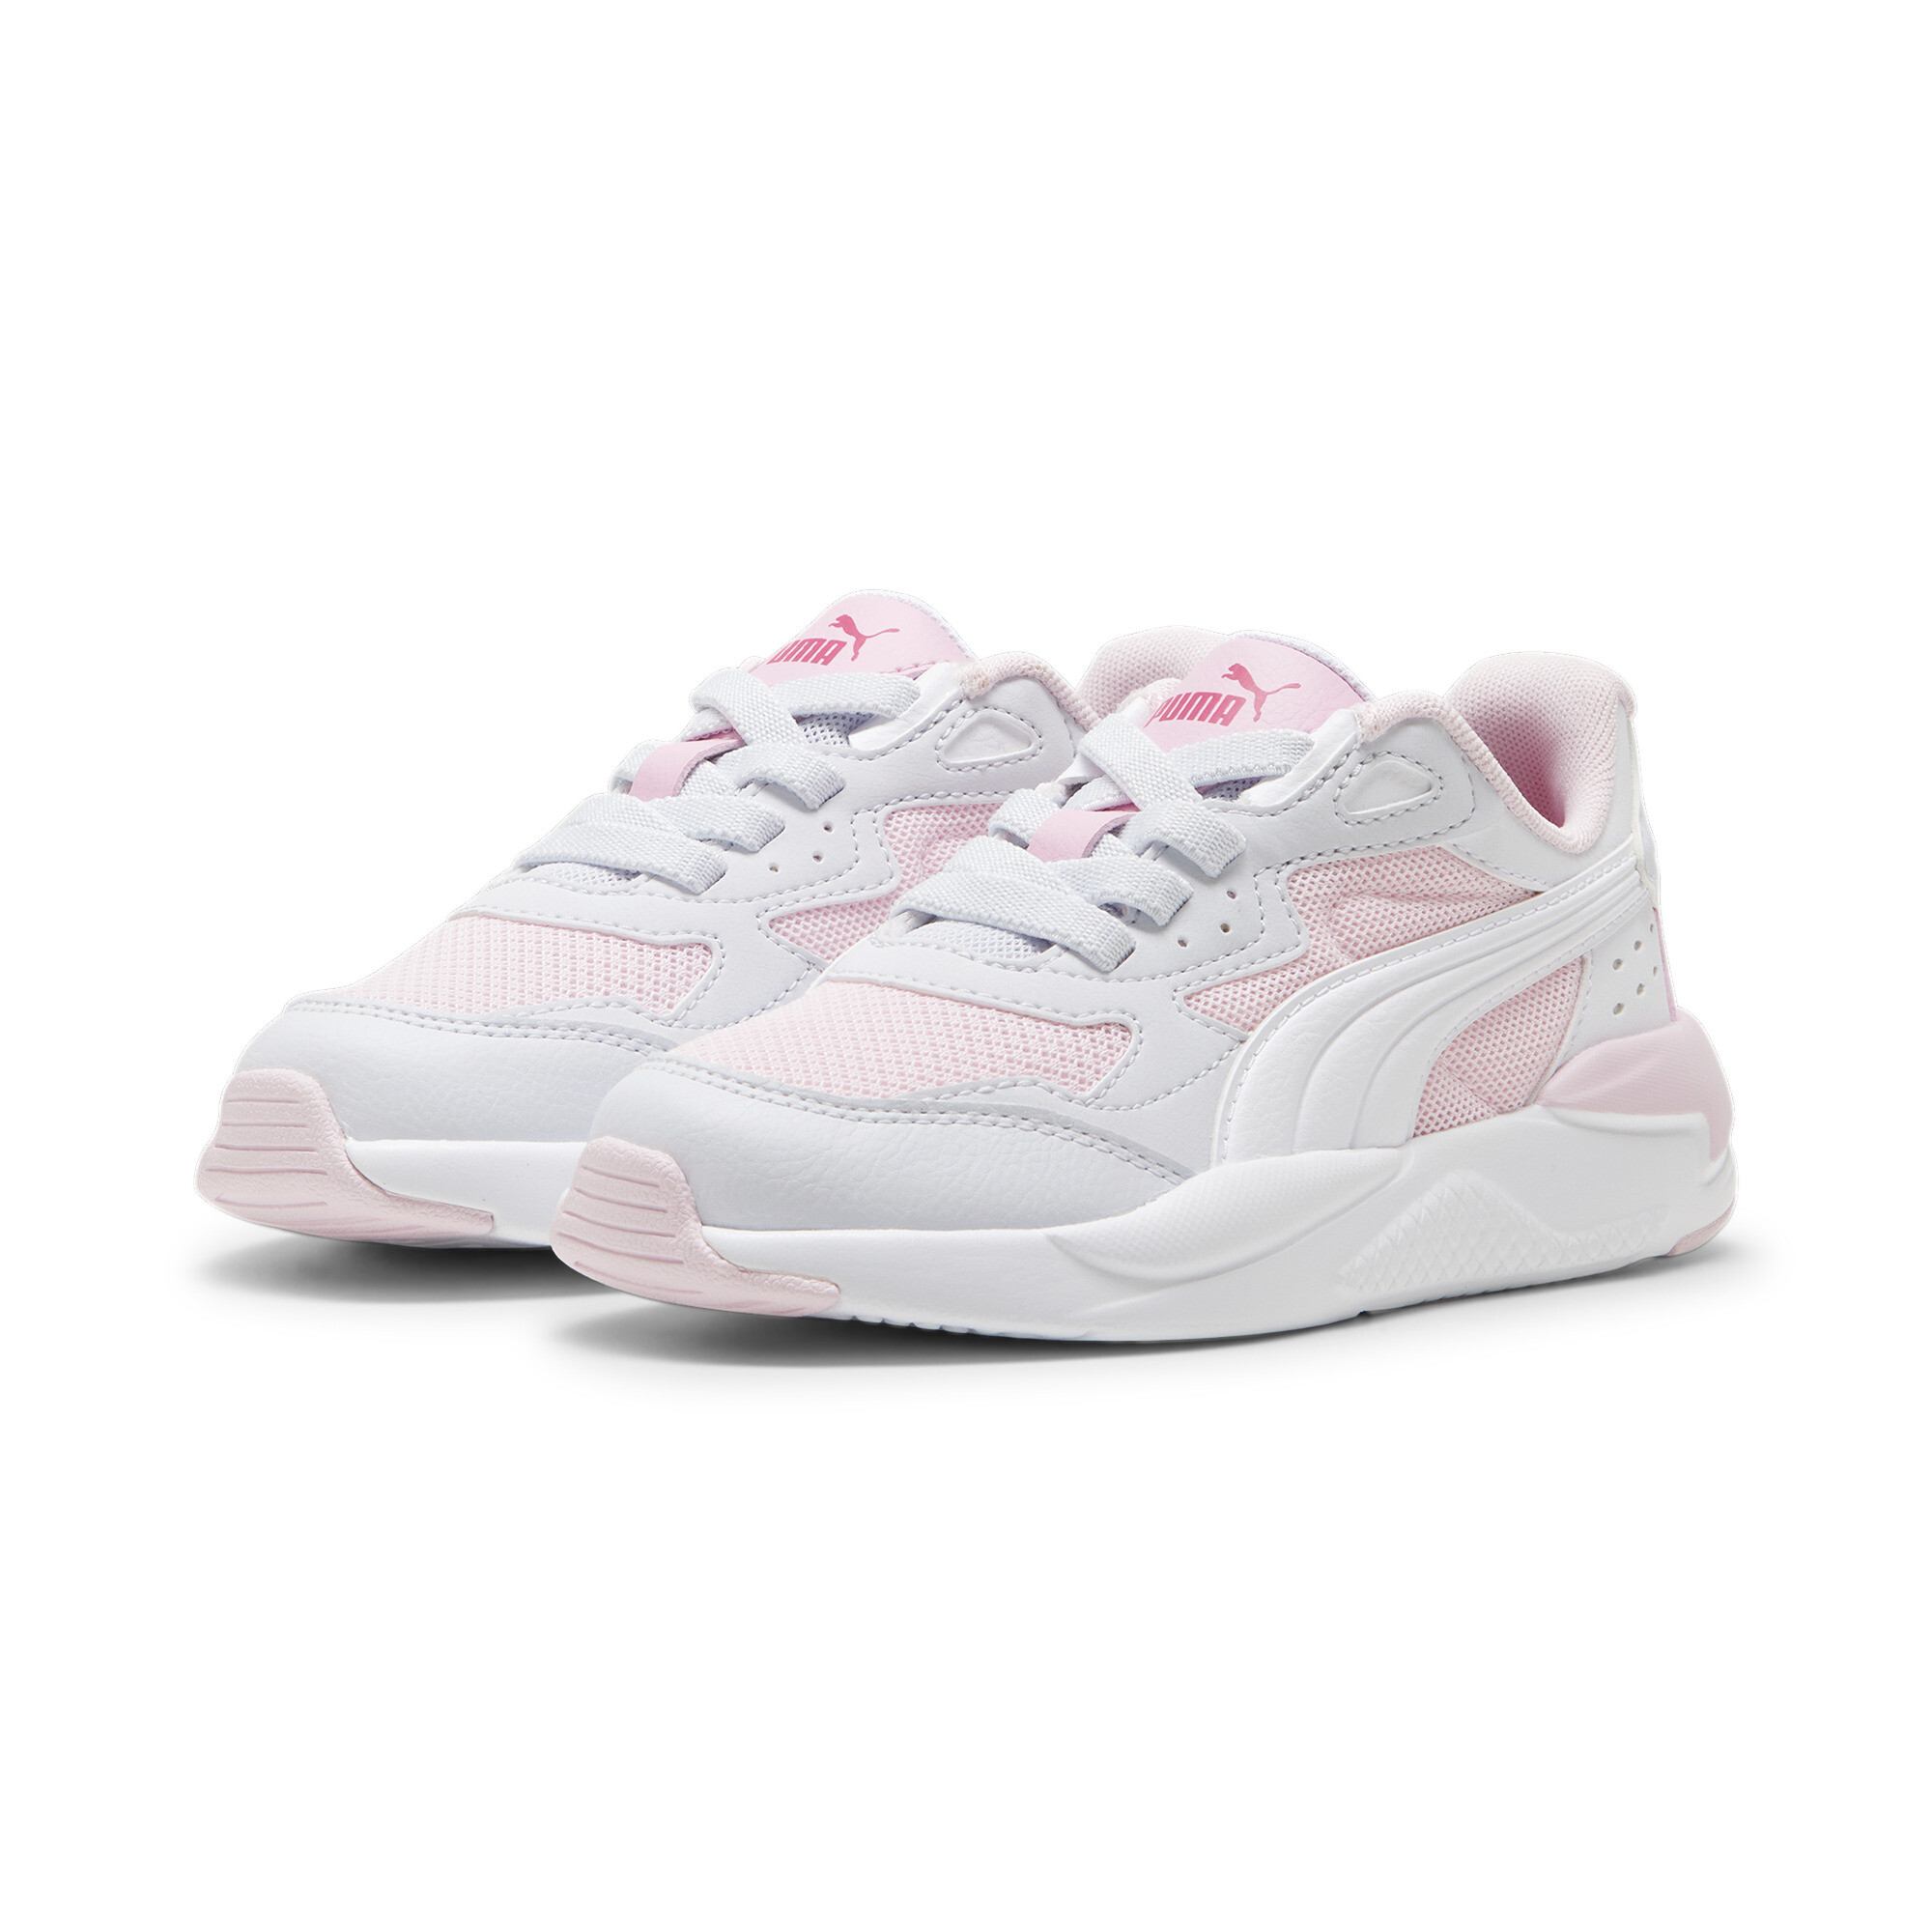 Puma X-Ray Speed AC Kids' Trainers, Pink, Size 31, Shoes